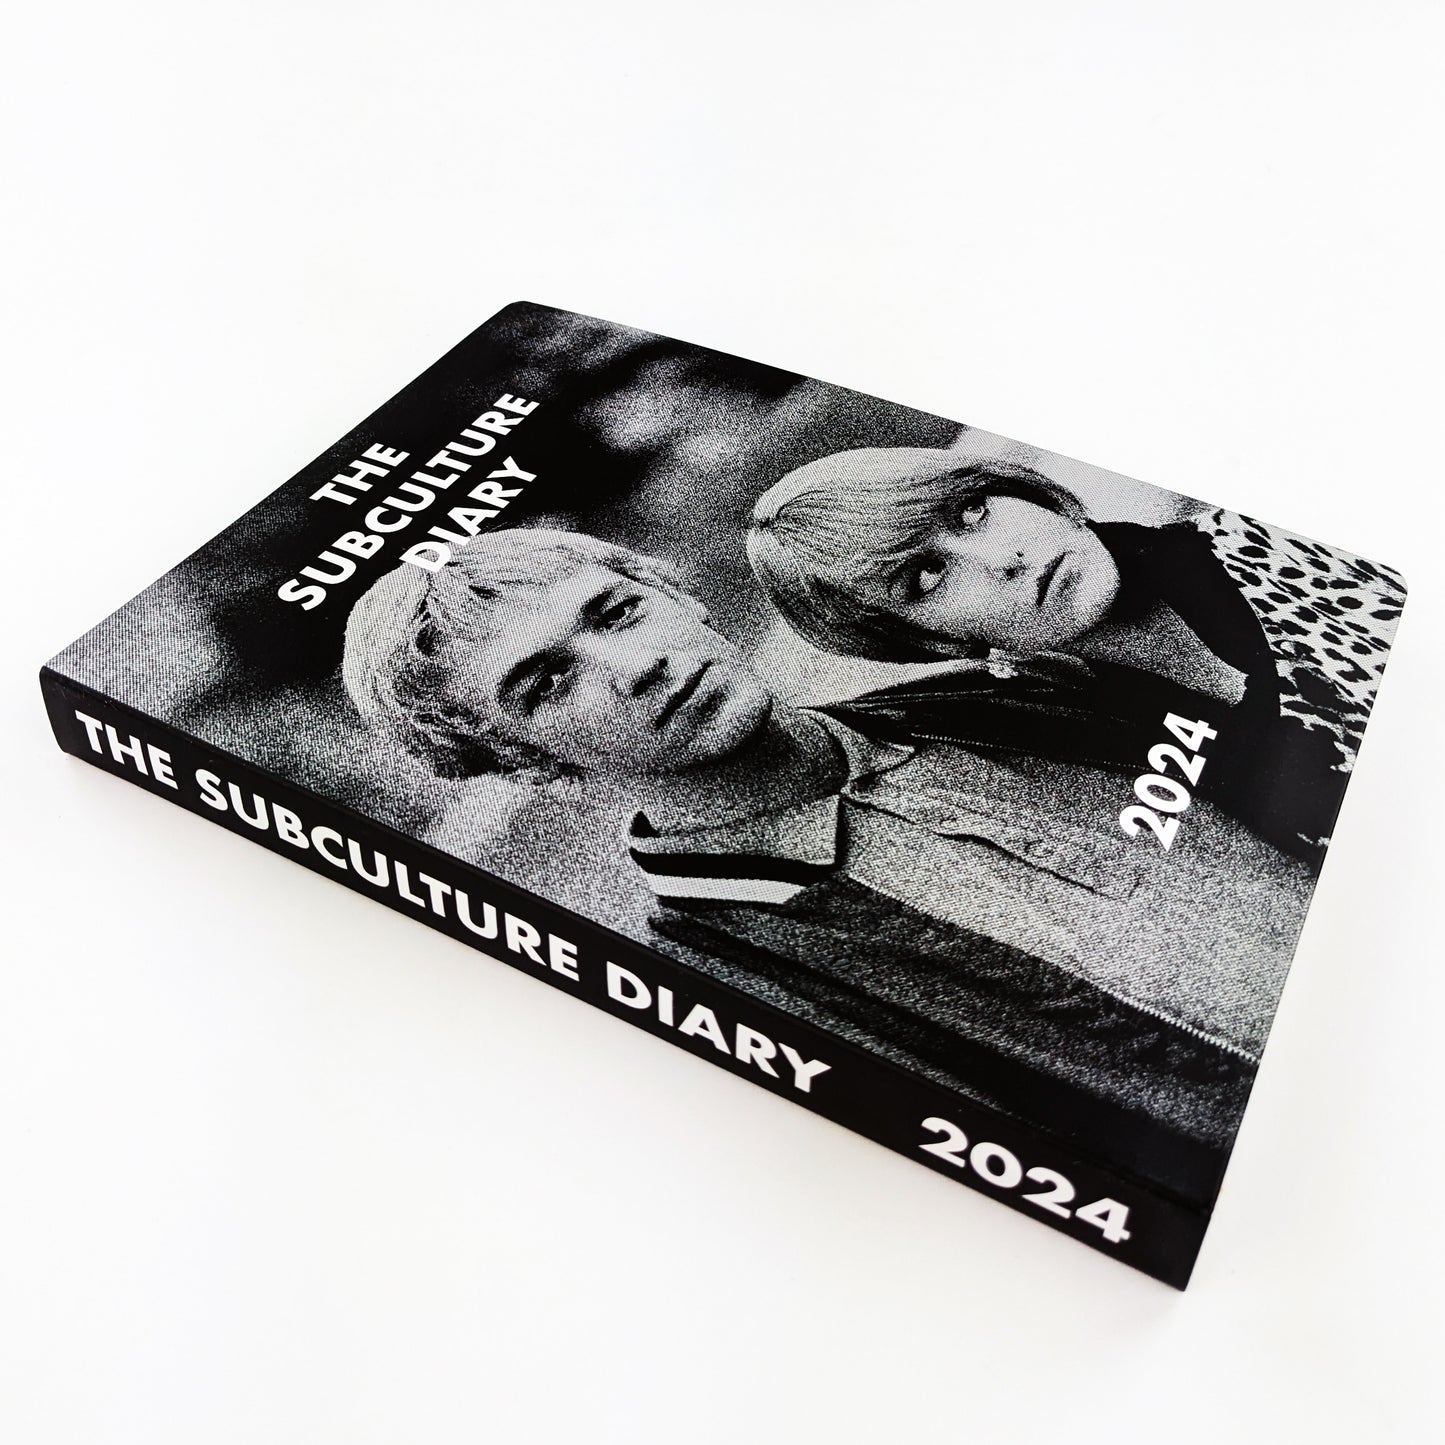 The Subculture Diary 2024